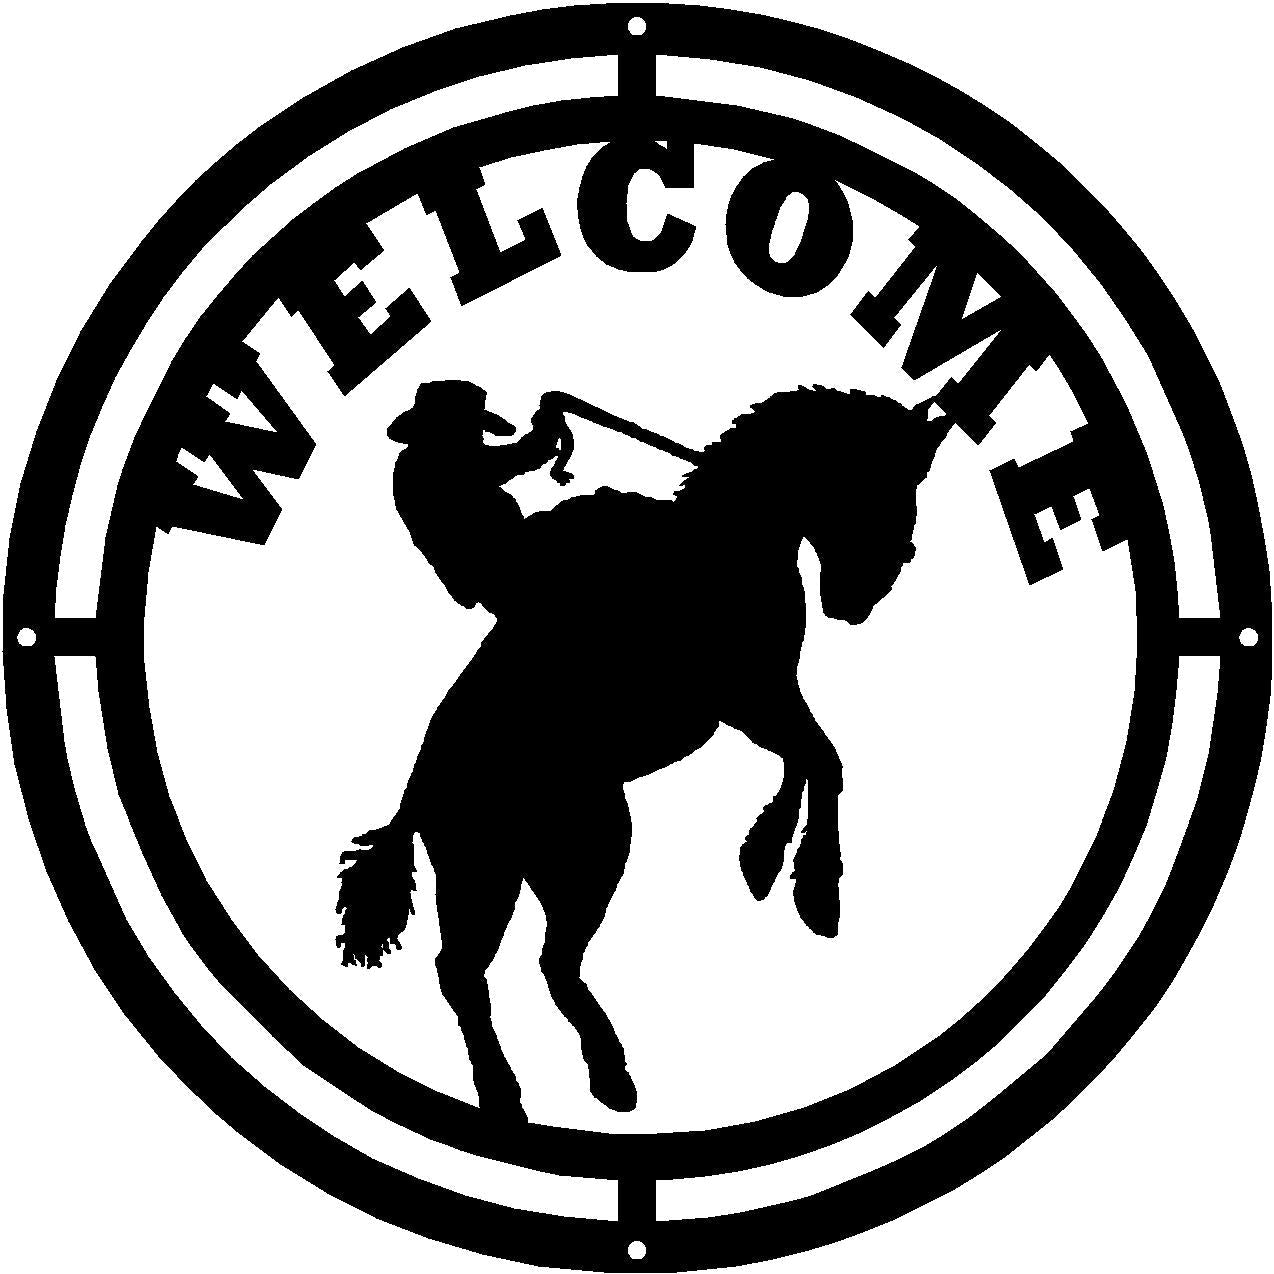 Cowboy & Mustang Round Welcome Sign - The Metal Peddler Welcome Signs cowboy, horse, porch, Welcome Sign, western